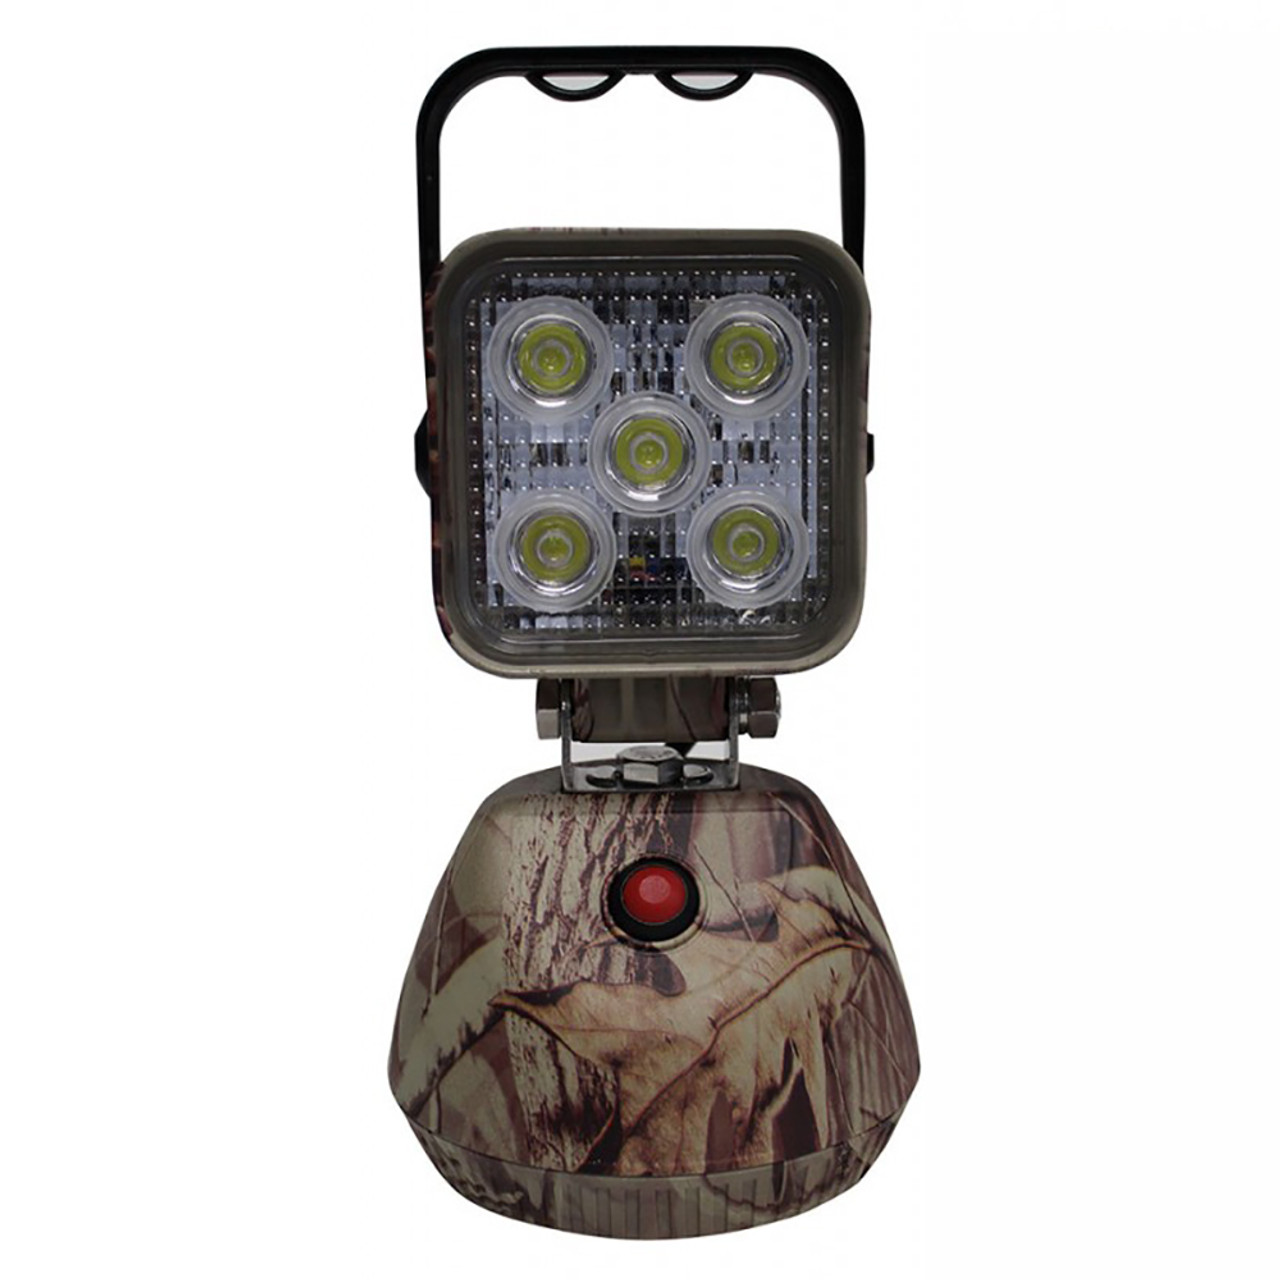 Code-3 Portable Worklight, 5 LED black and 3 LED camo housing CW2461